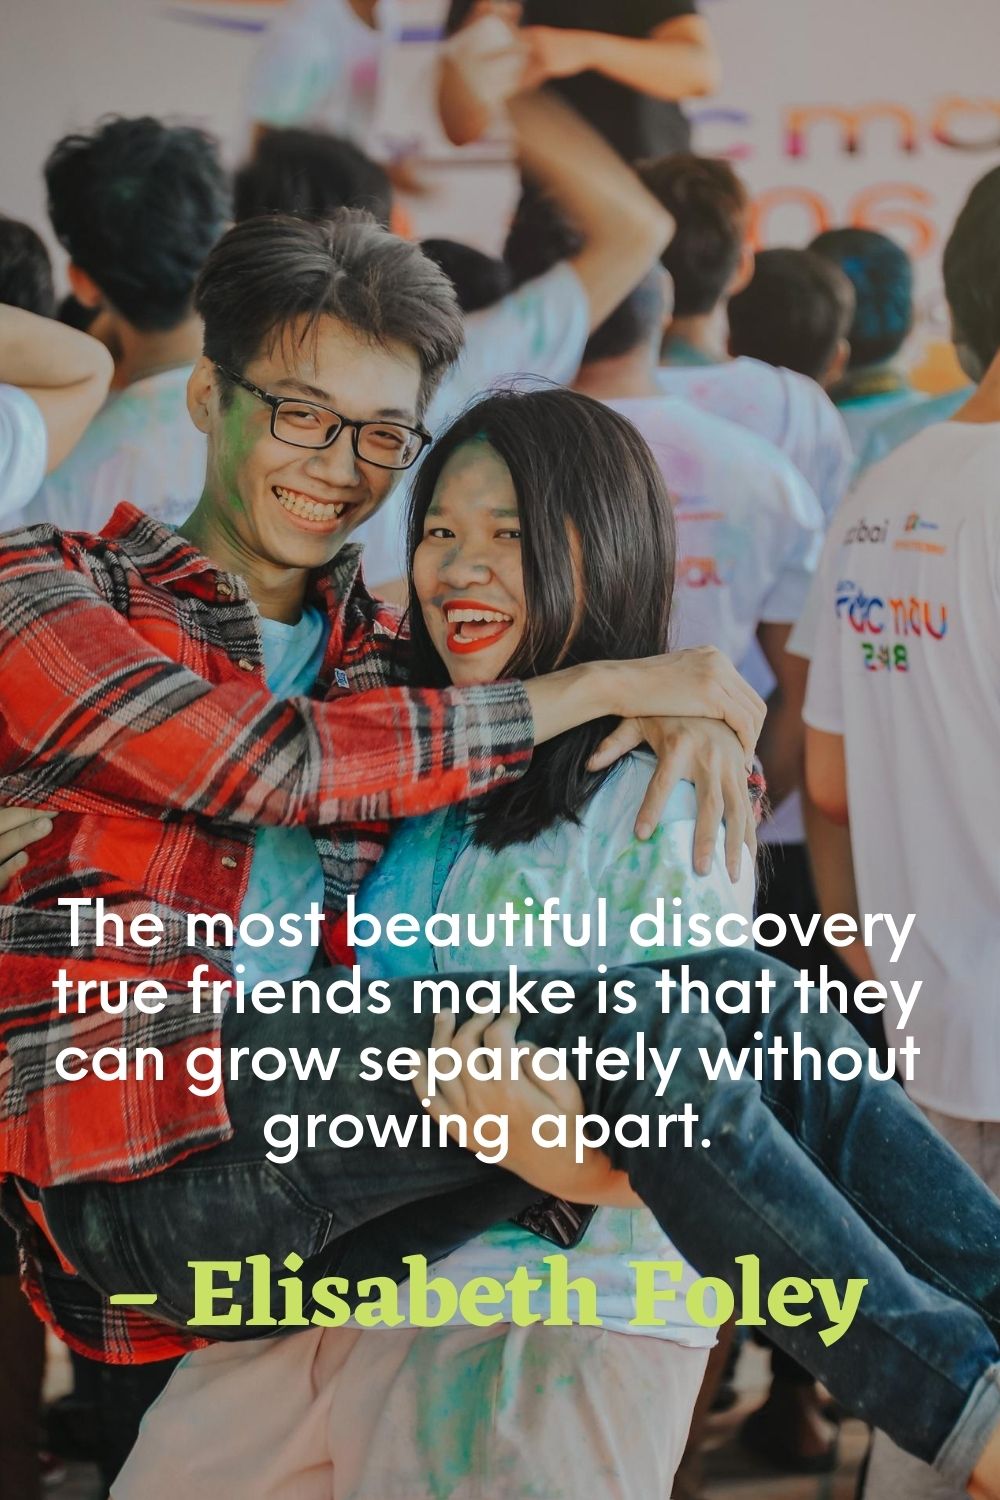 The most beautiful discovery true friends make is that they can grow separately without growing apart. – Elisabeth Foley